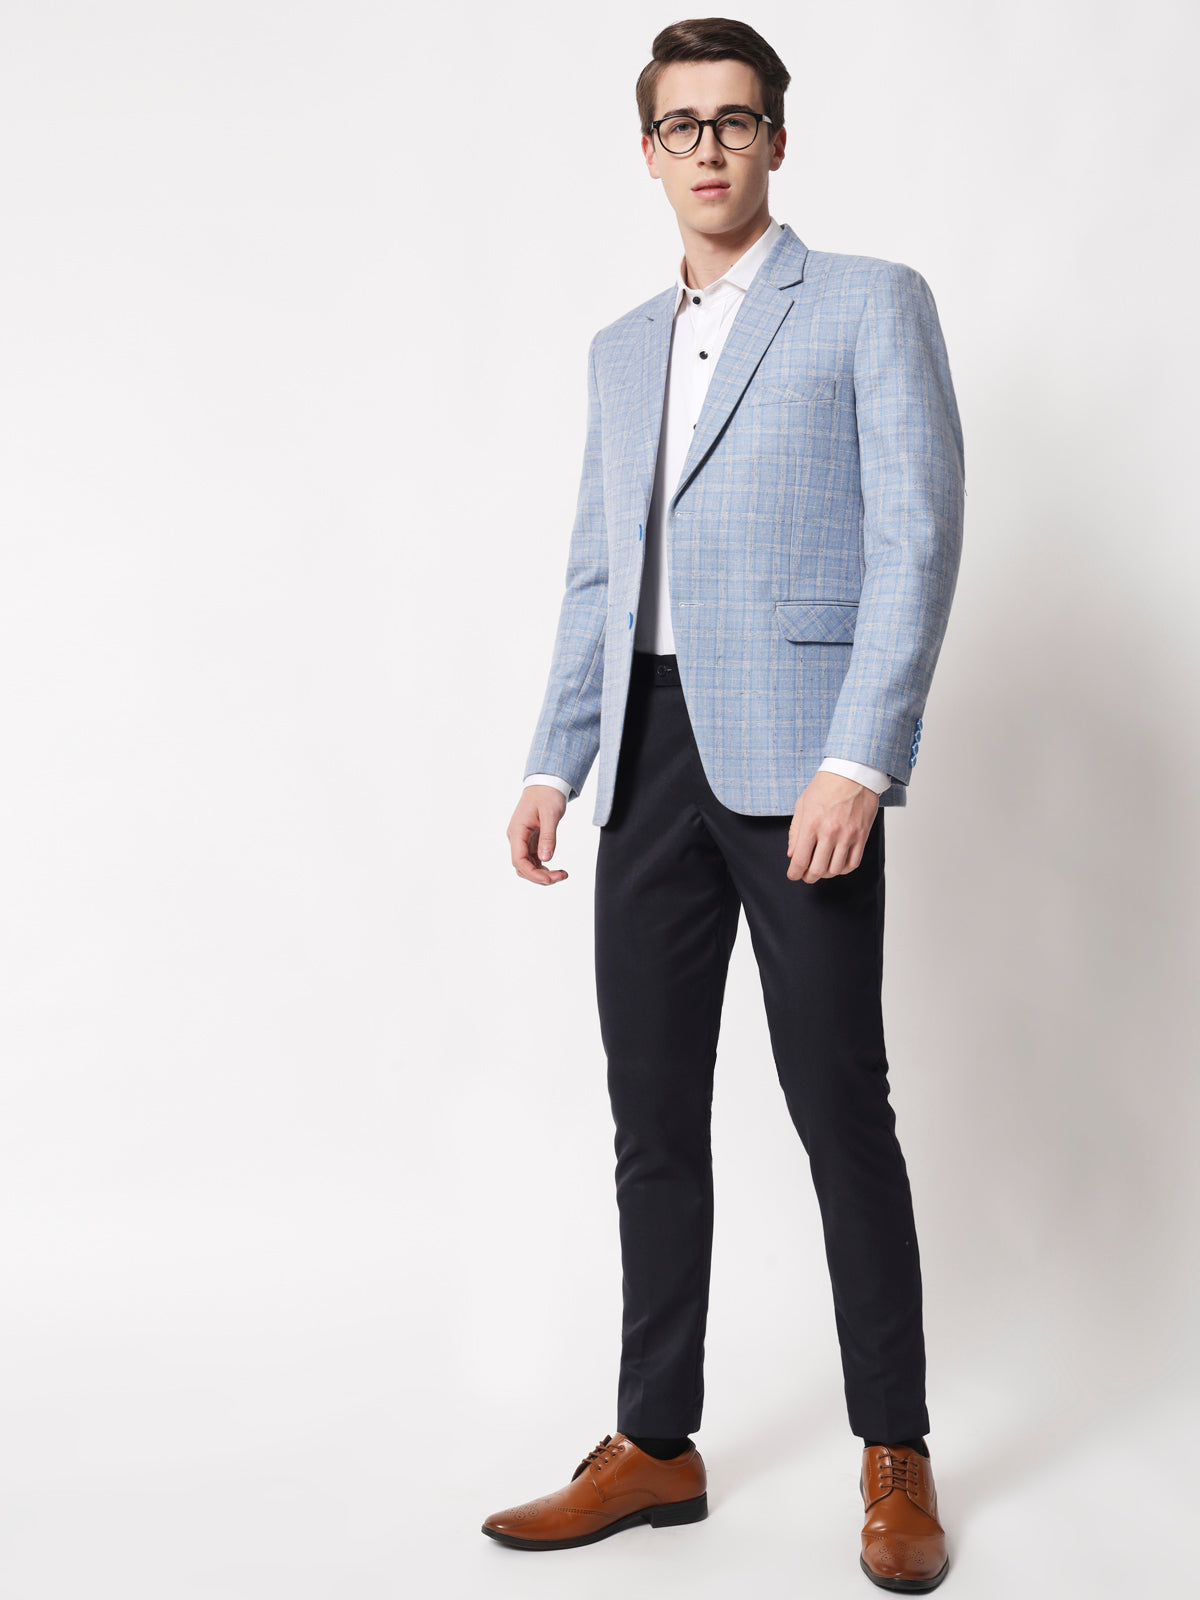 Pin on Men's Blazers Including Sport Coats and Jackets